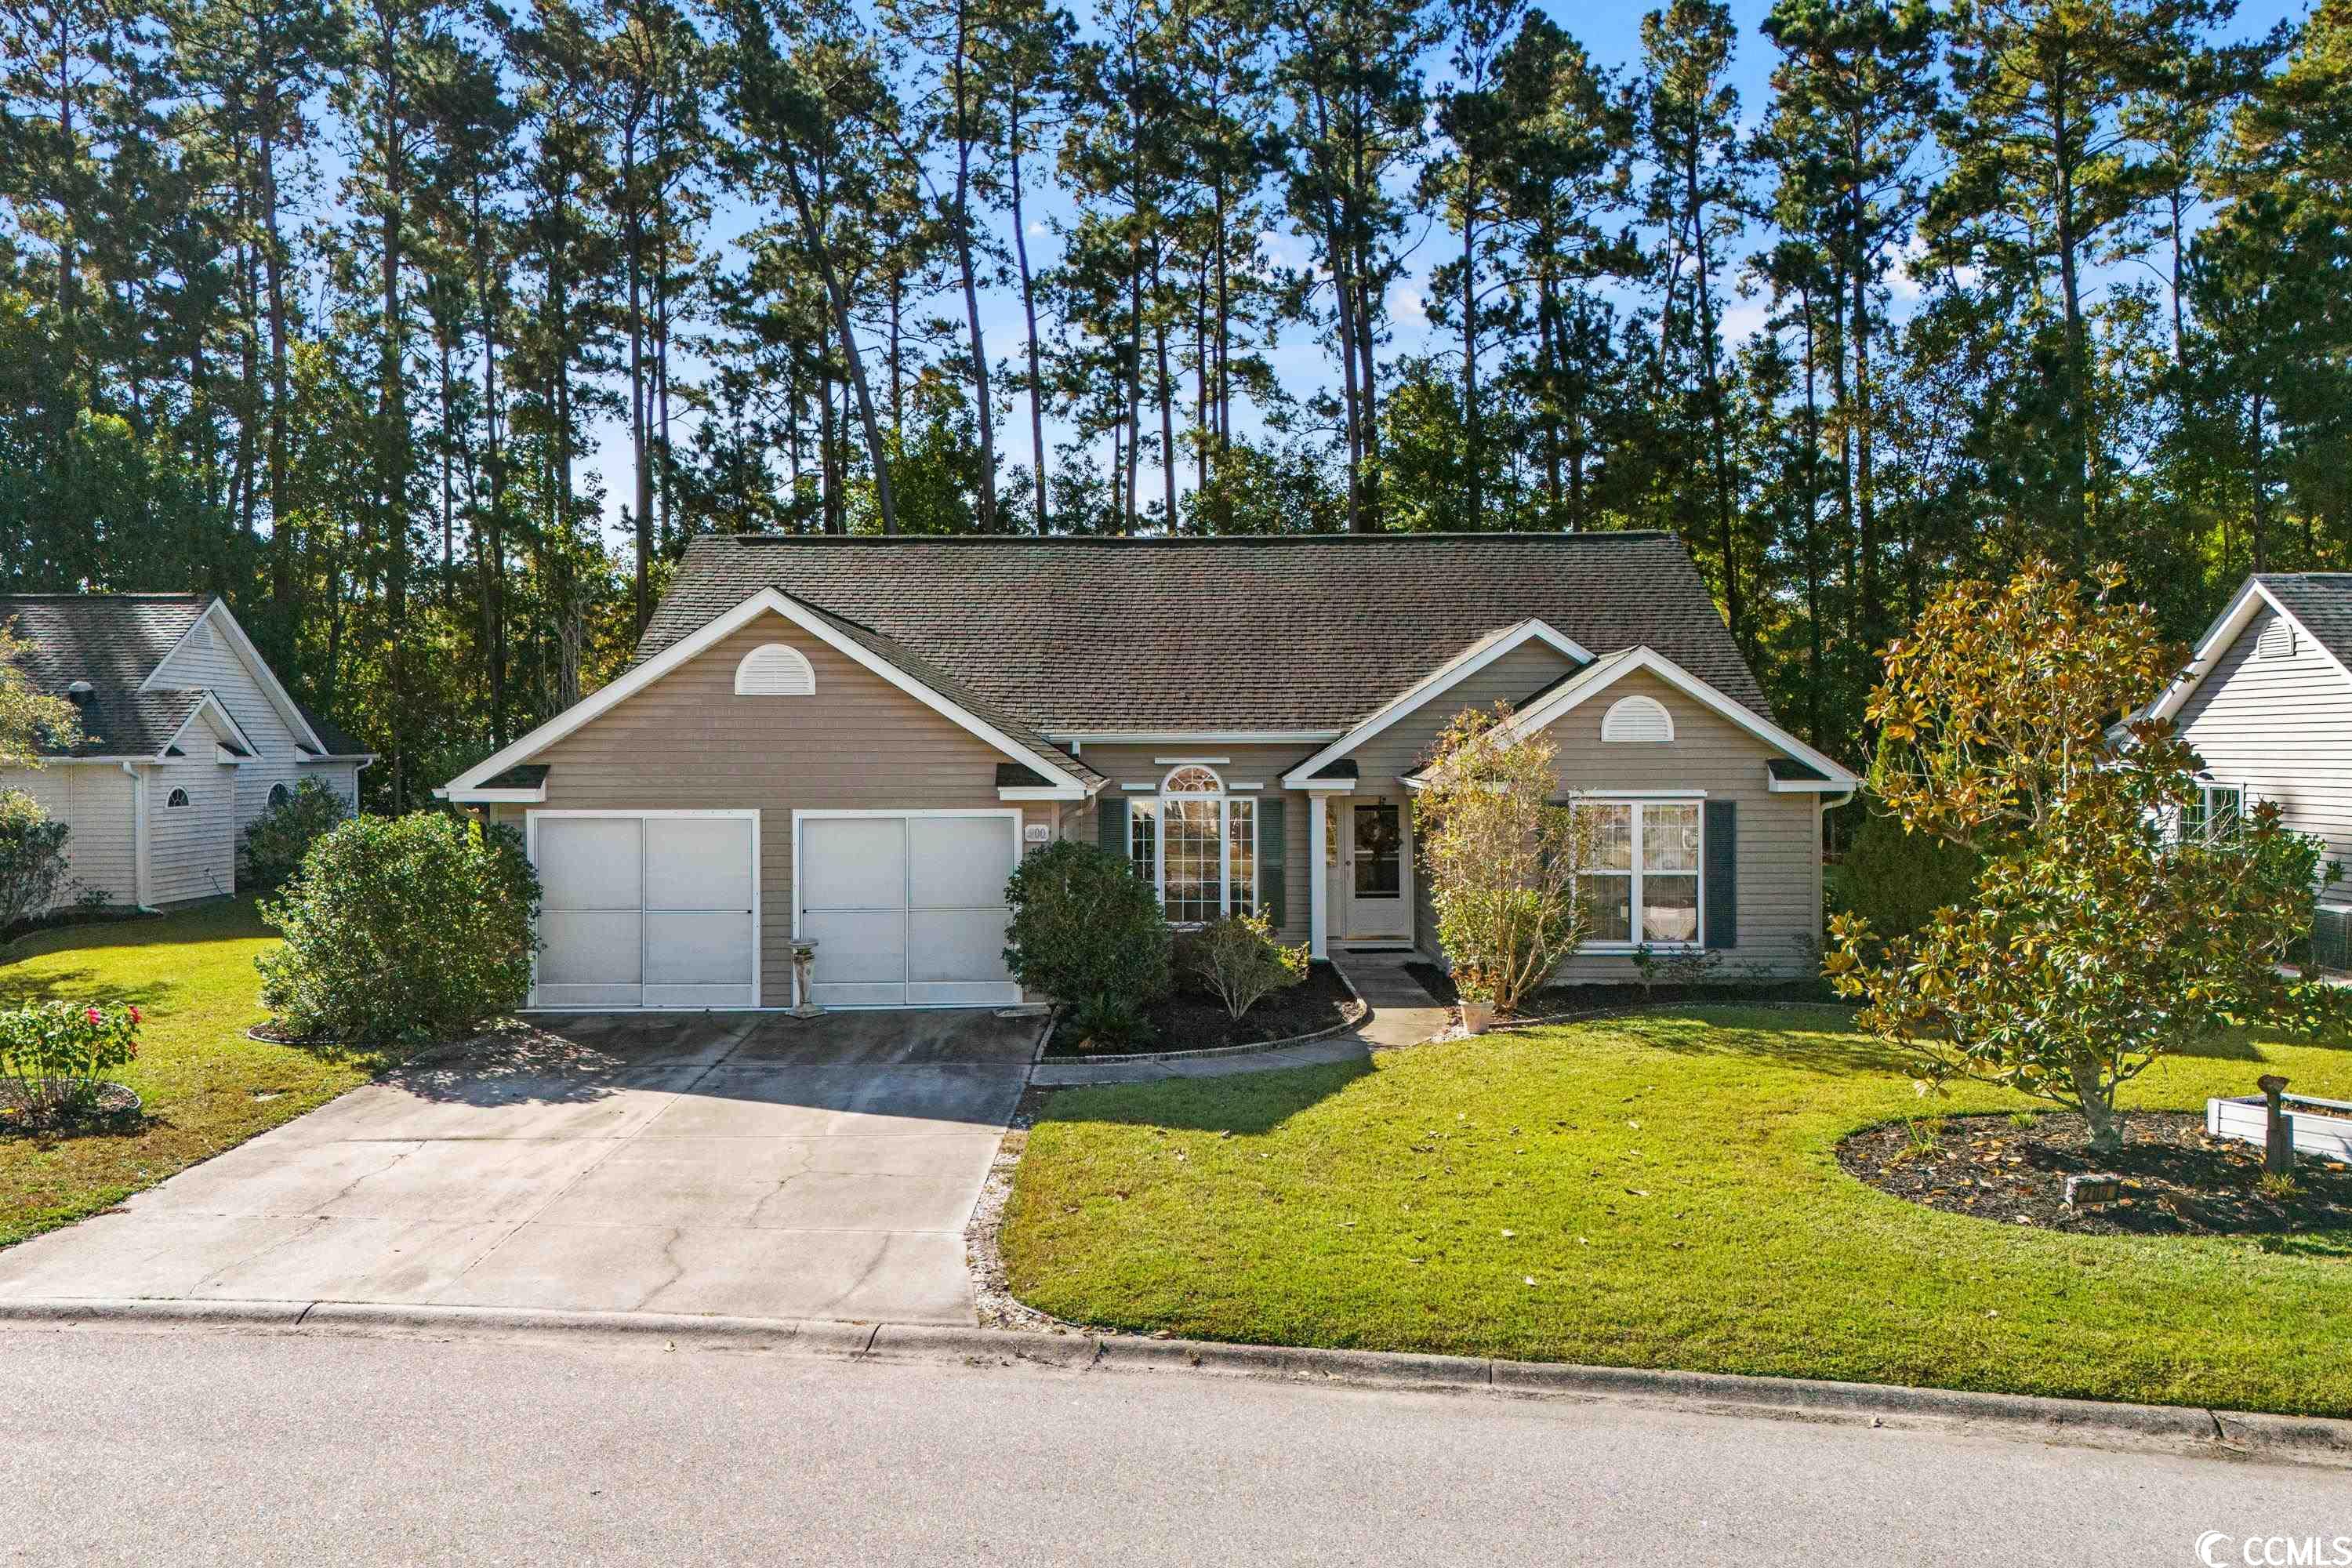 200 Covey Point Ct. Murrells Inlet, SC 29576